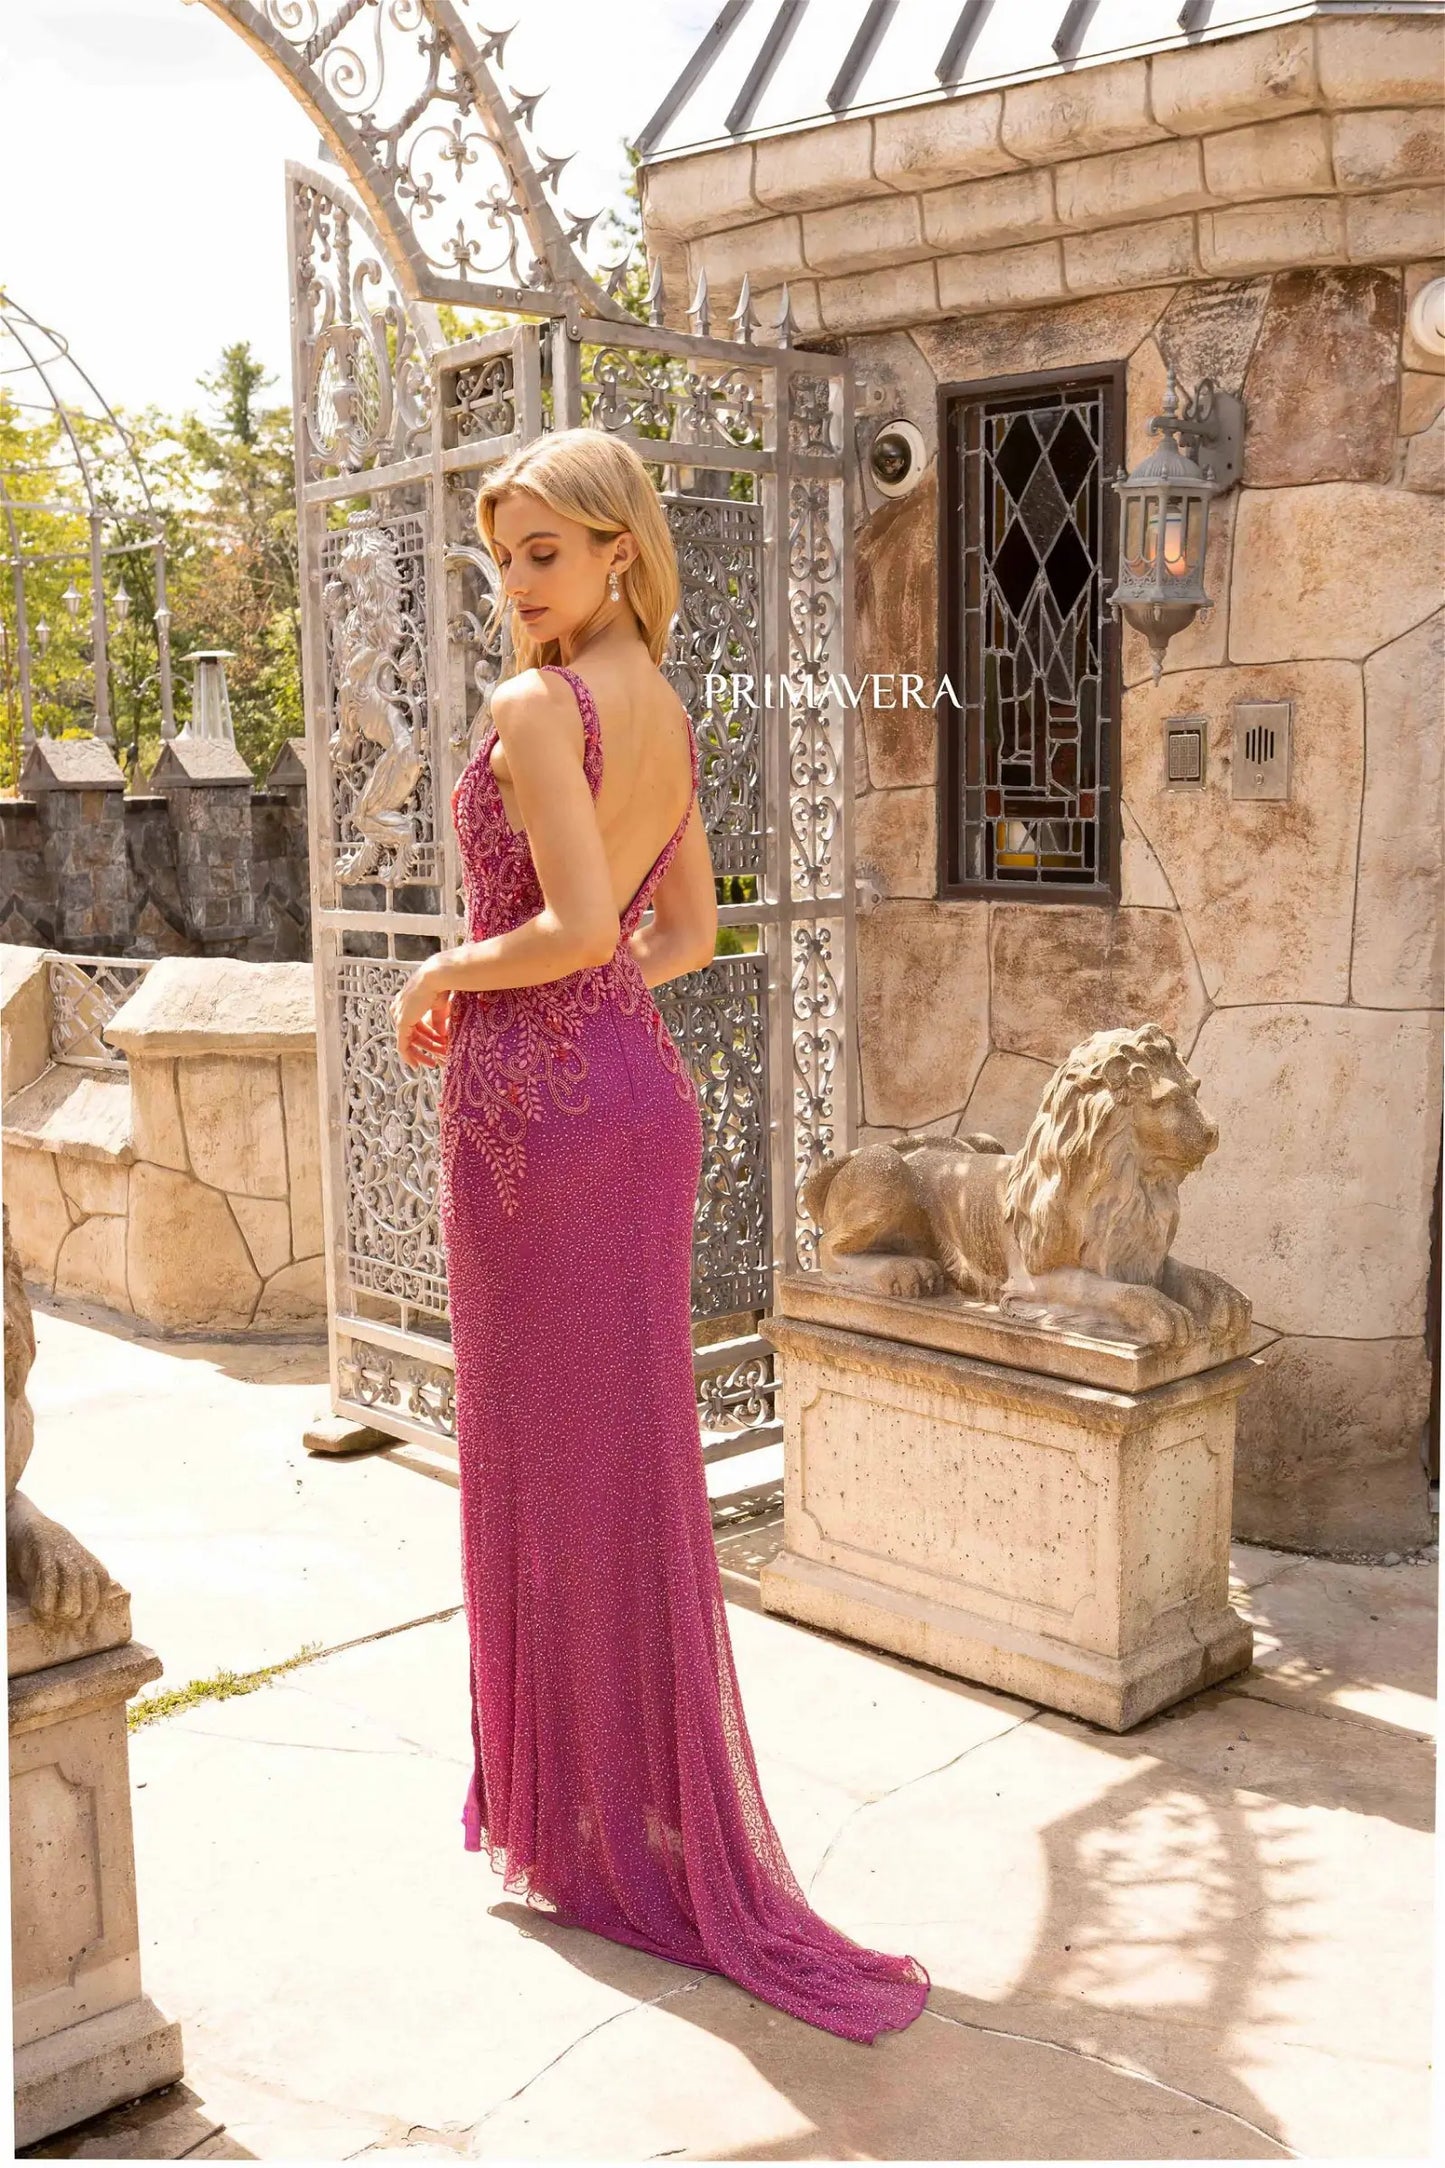 Primavera Couture 3923 is an elegantly beaded evening gown that has a beaded design on the front top and the straps on the back that flow down the sides giving you a curvy effect.  The bottom of the dress has sparkling bugle beads throughout.  It is a V neckline, wide straps and V back.  Available Sizes: 000-24  Available Colors: ROSE PINK,POWDER BLUE,FUSHIA,CORAL